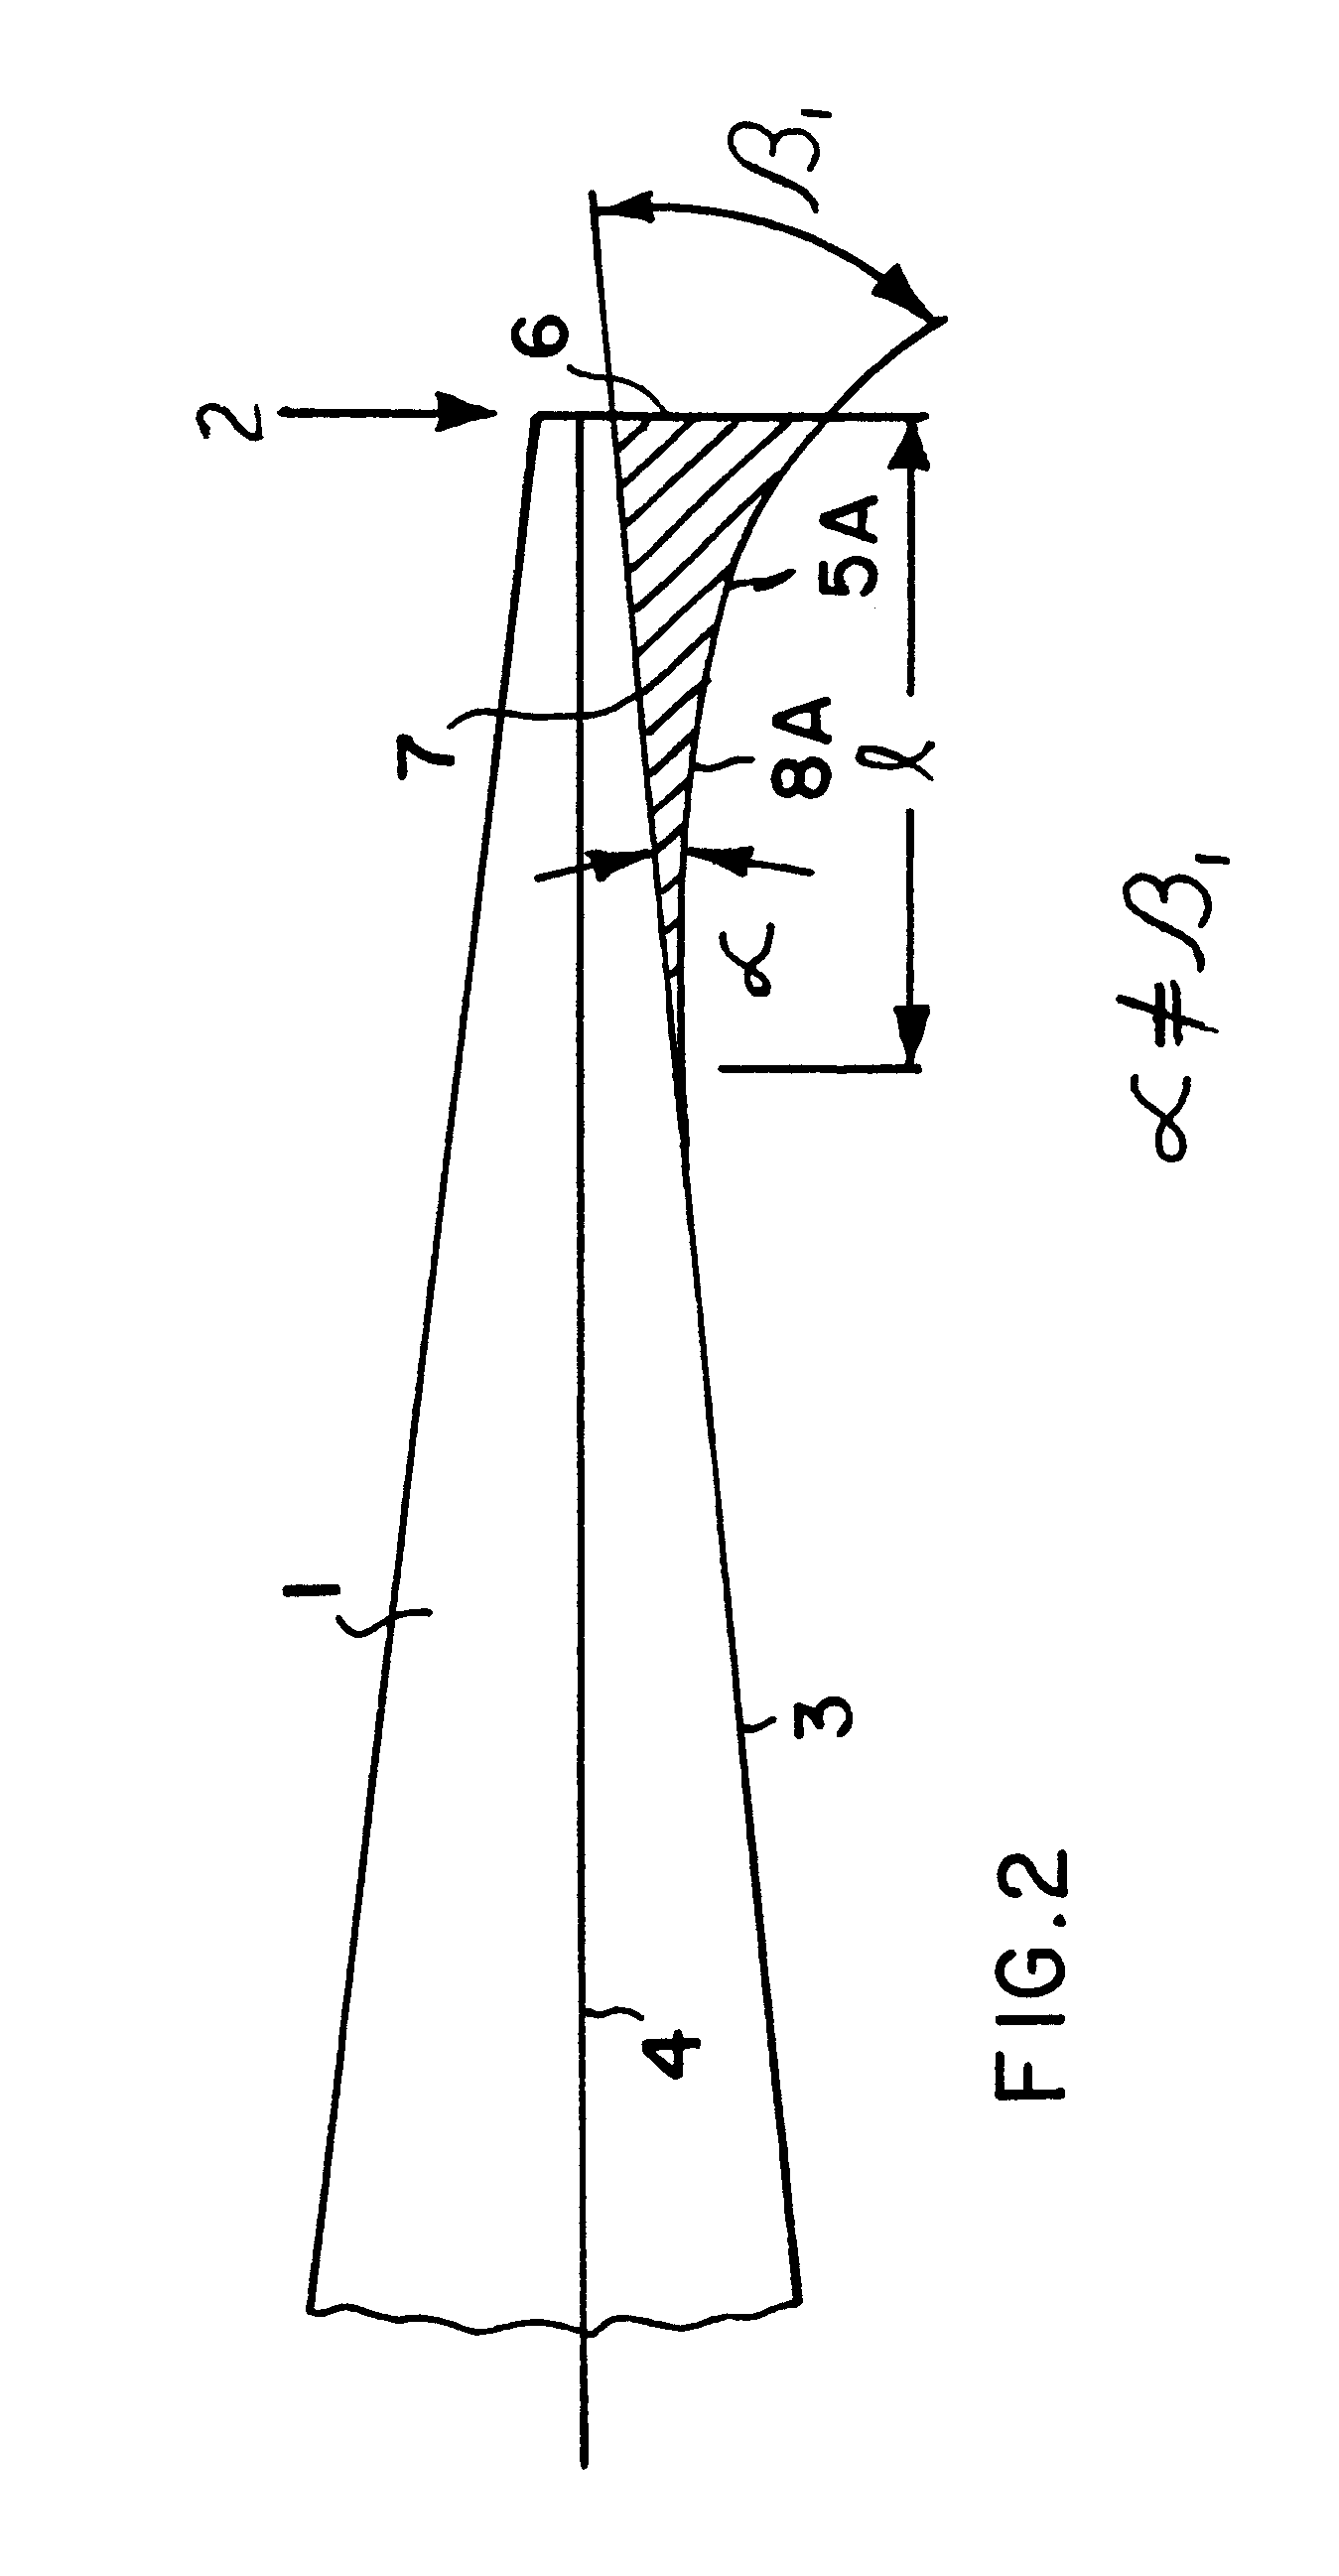 Trailing edge wedge for an aircraft wing